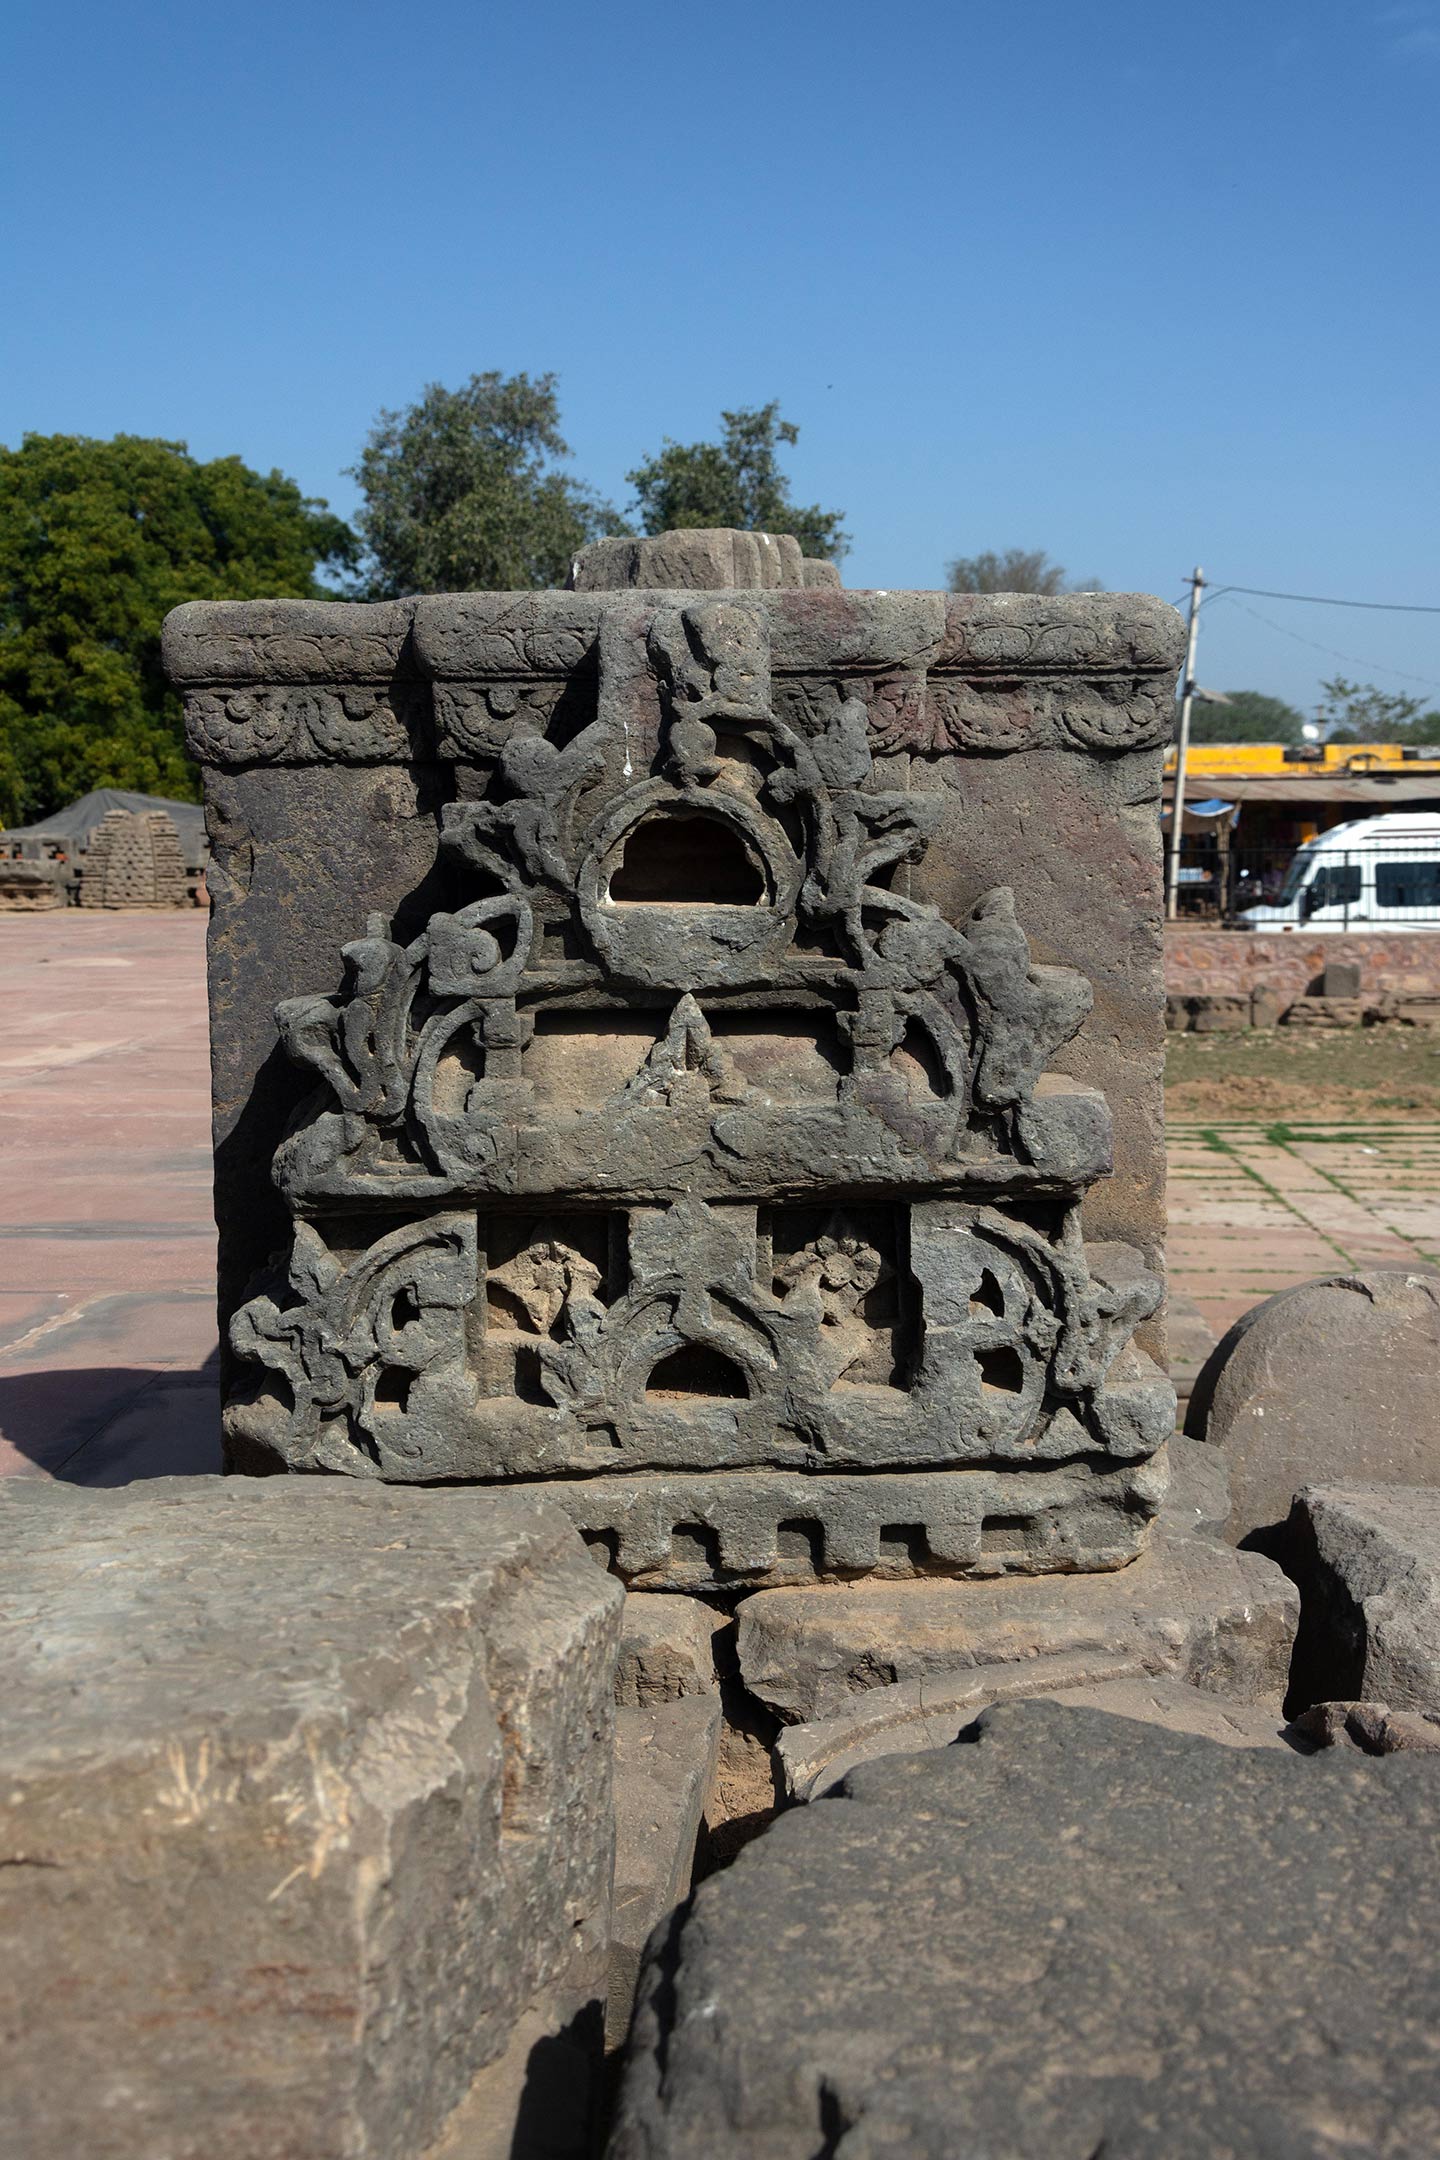 Broken debris from the original temple assembled on the landing of the first set of steps on the adhisthana. The split gavaksha motif is repeated all through the temple. It is a motif that is often seen in Hindu temples.